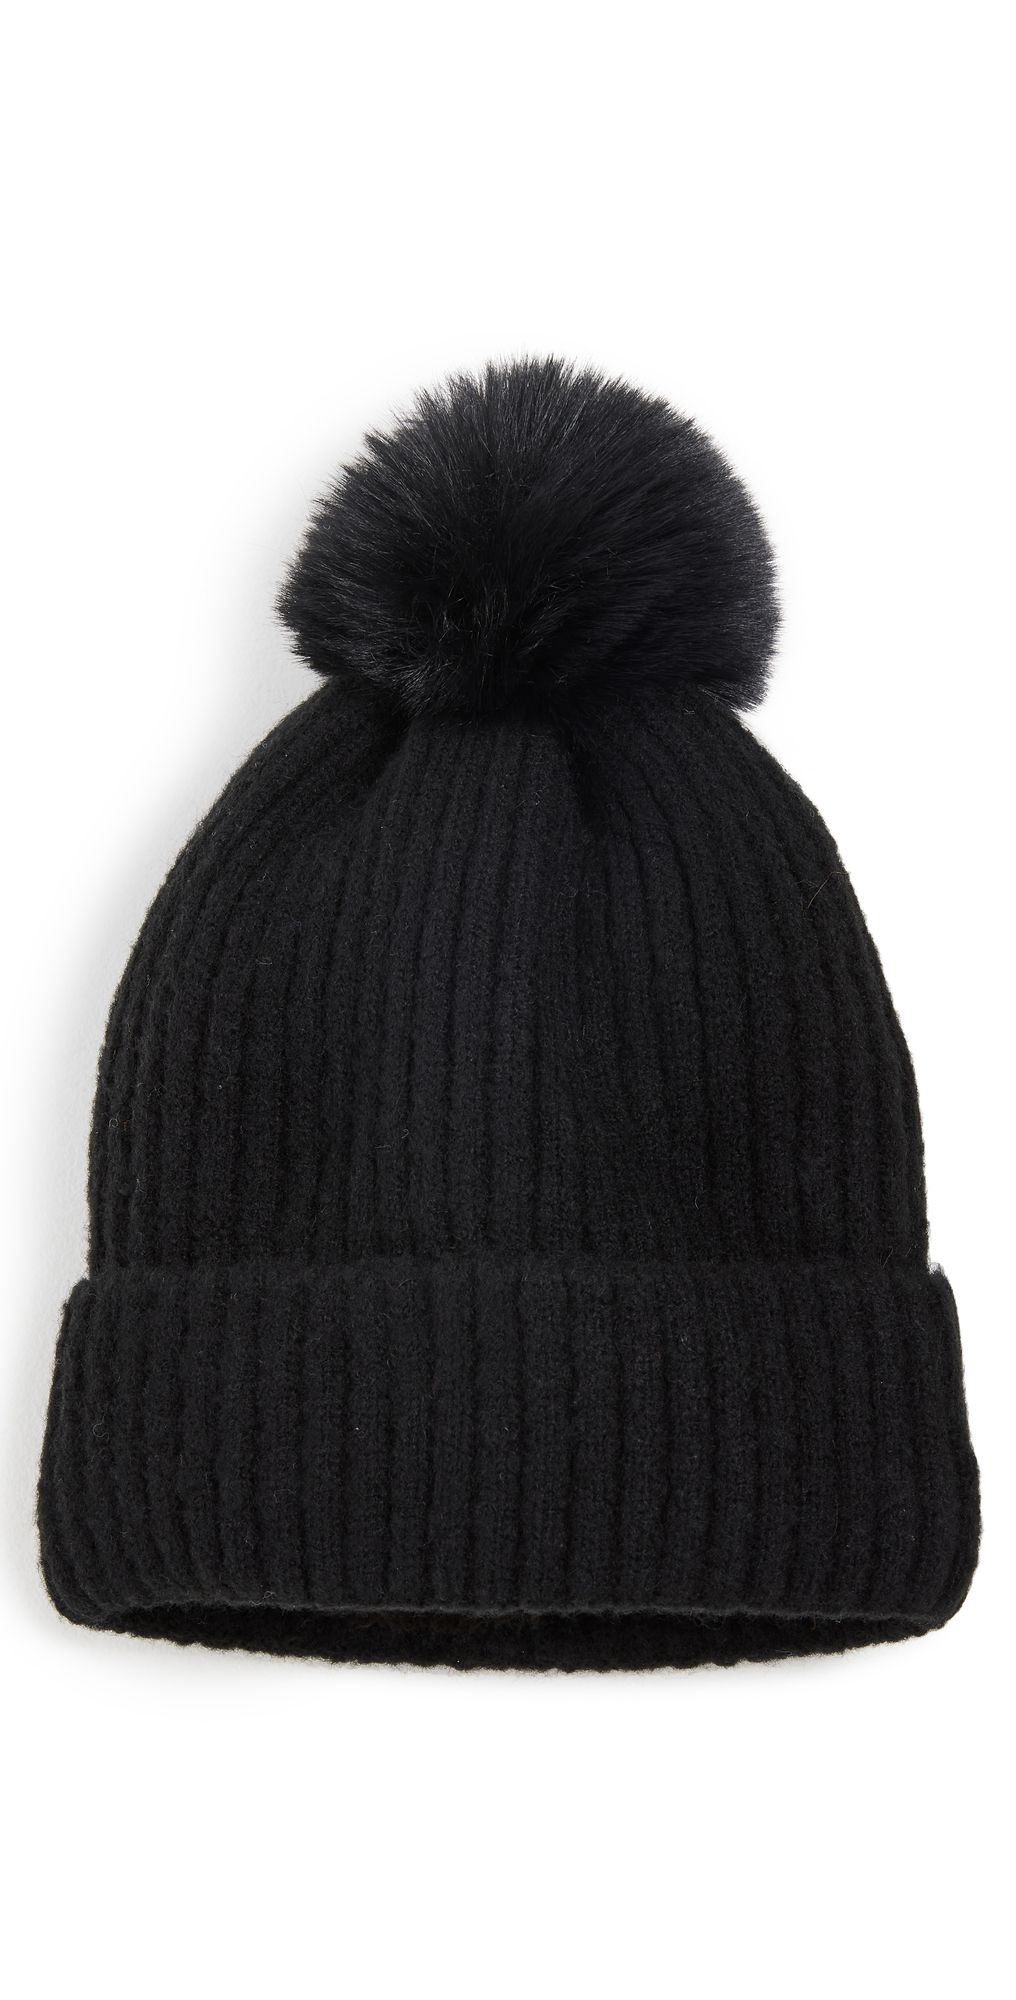 Hat Attack City Beanie With Cozy Lining | SHOPBOP | Shopbop